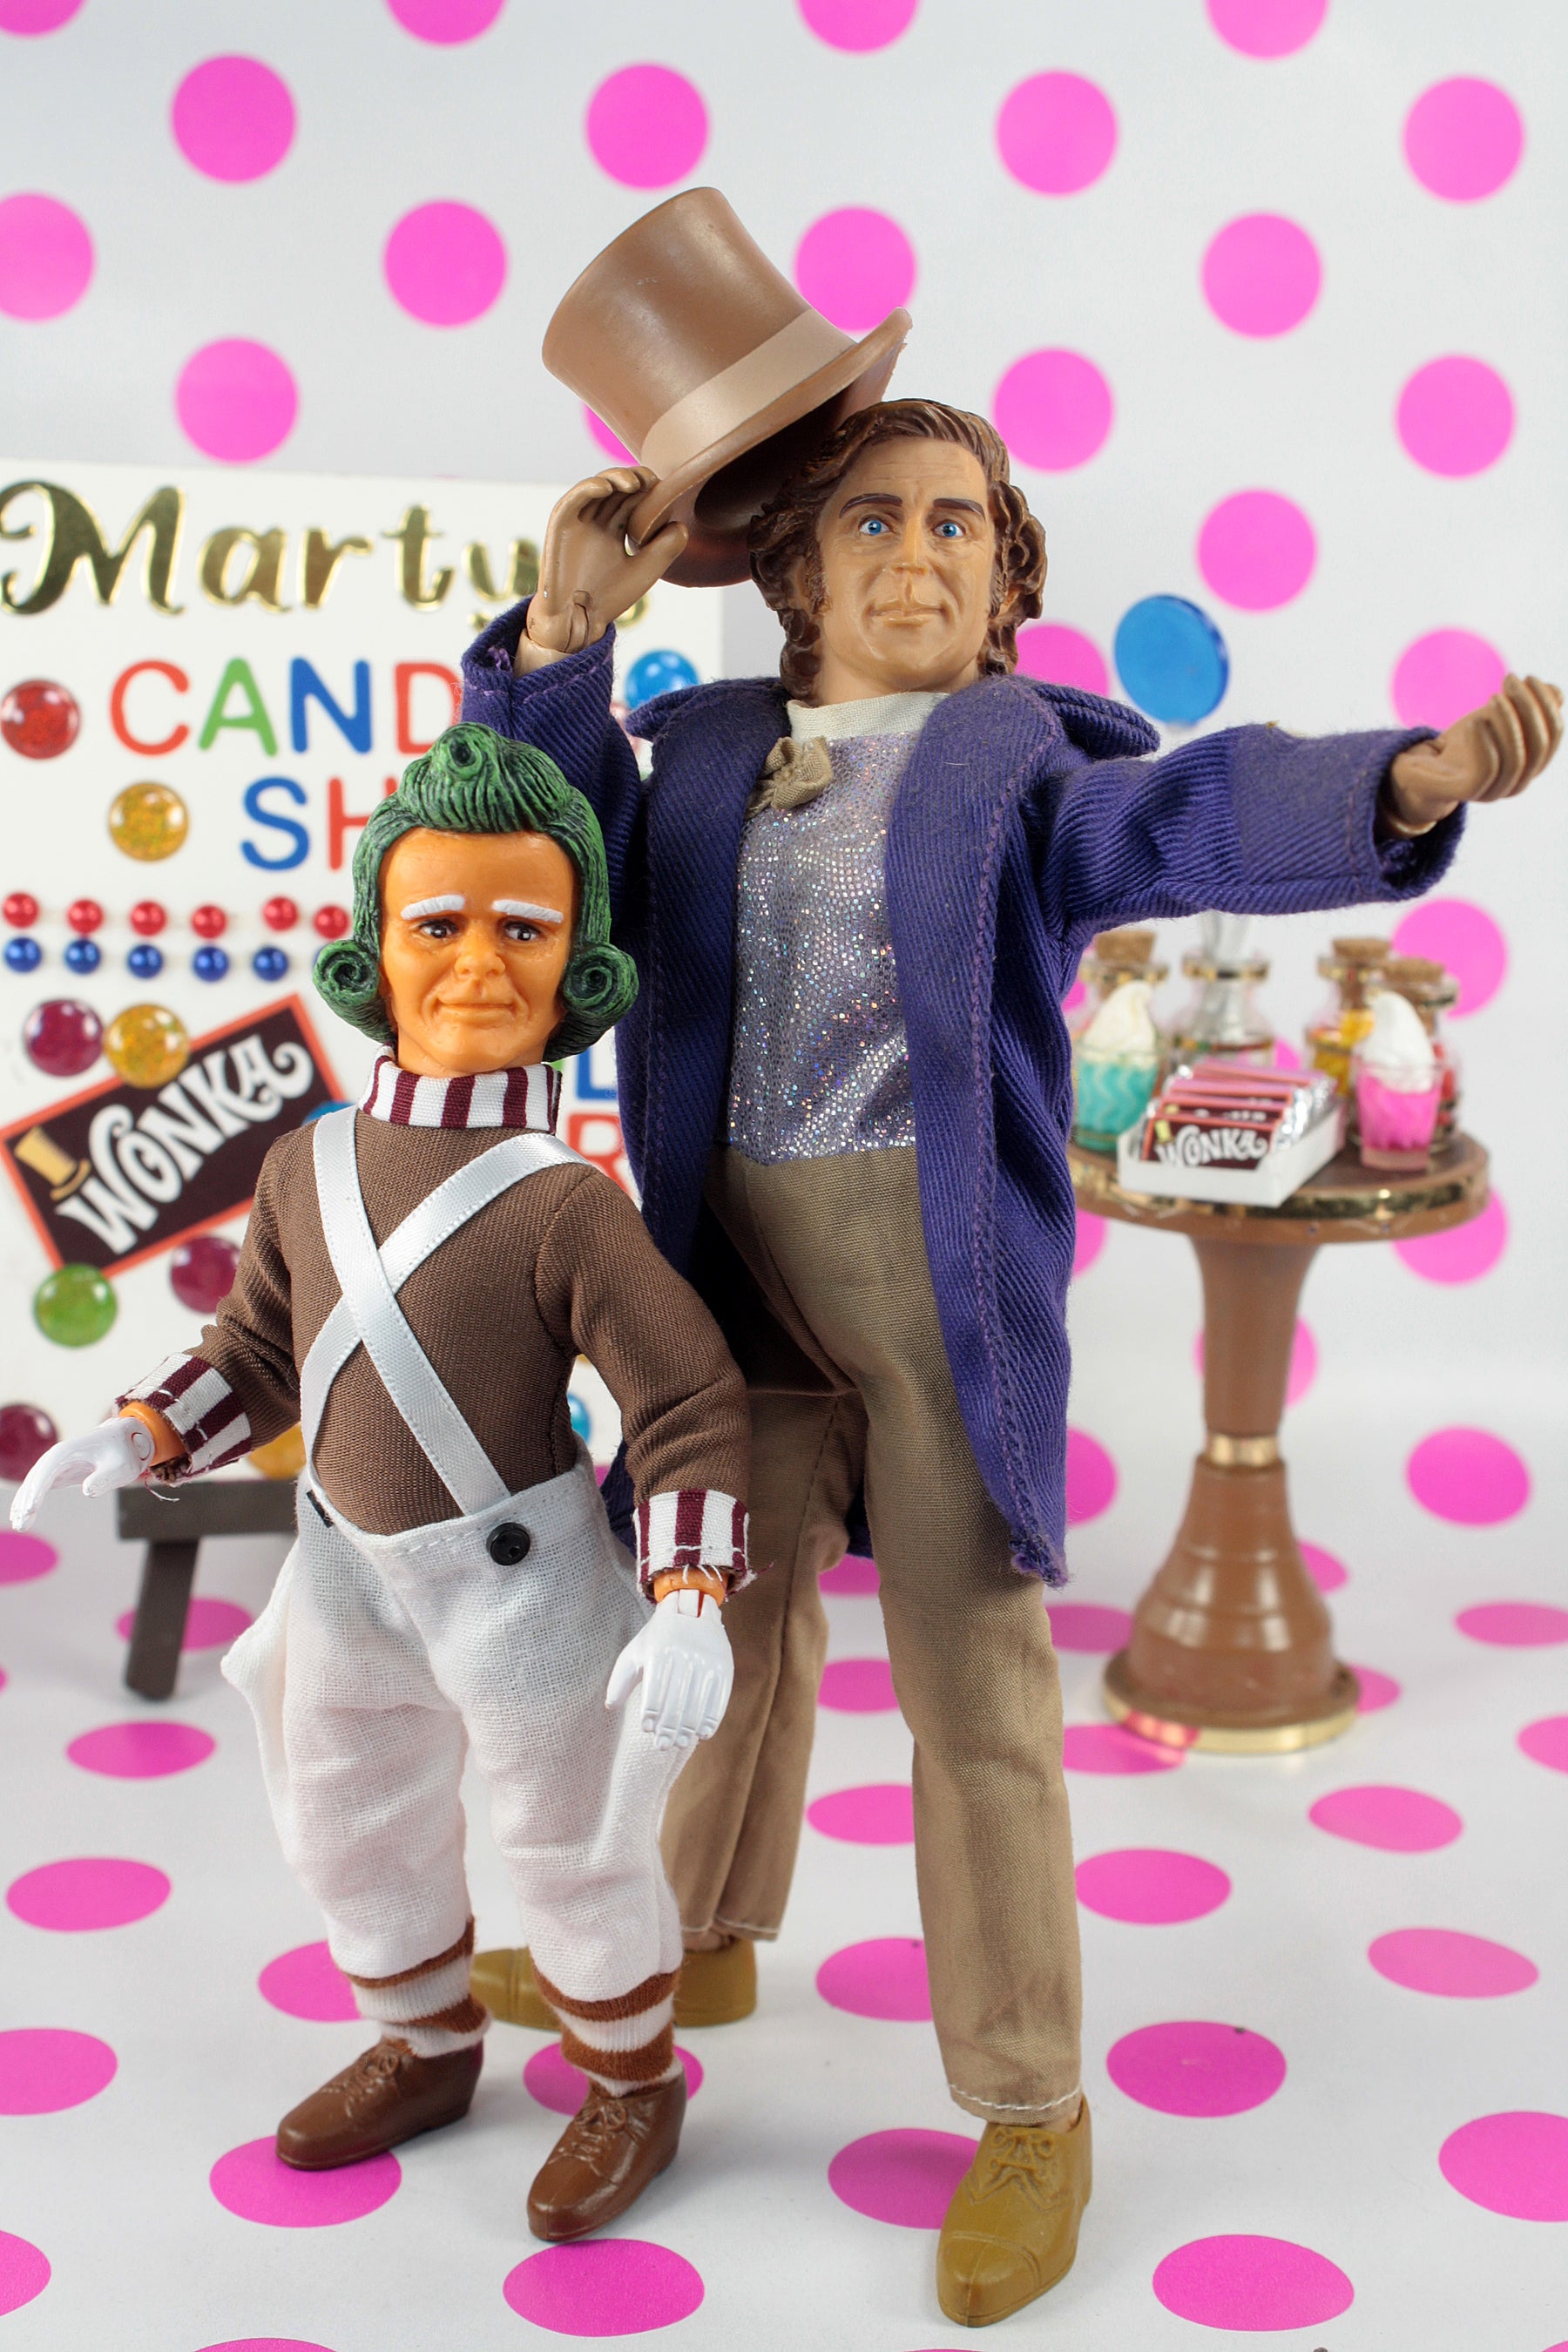 Mego Movies Wave 18 - Oompa Loompa (Willy Wonka) 8" Action Figure (Pre-Order Release Date To Be Determined)